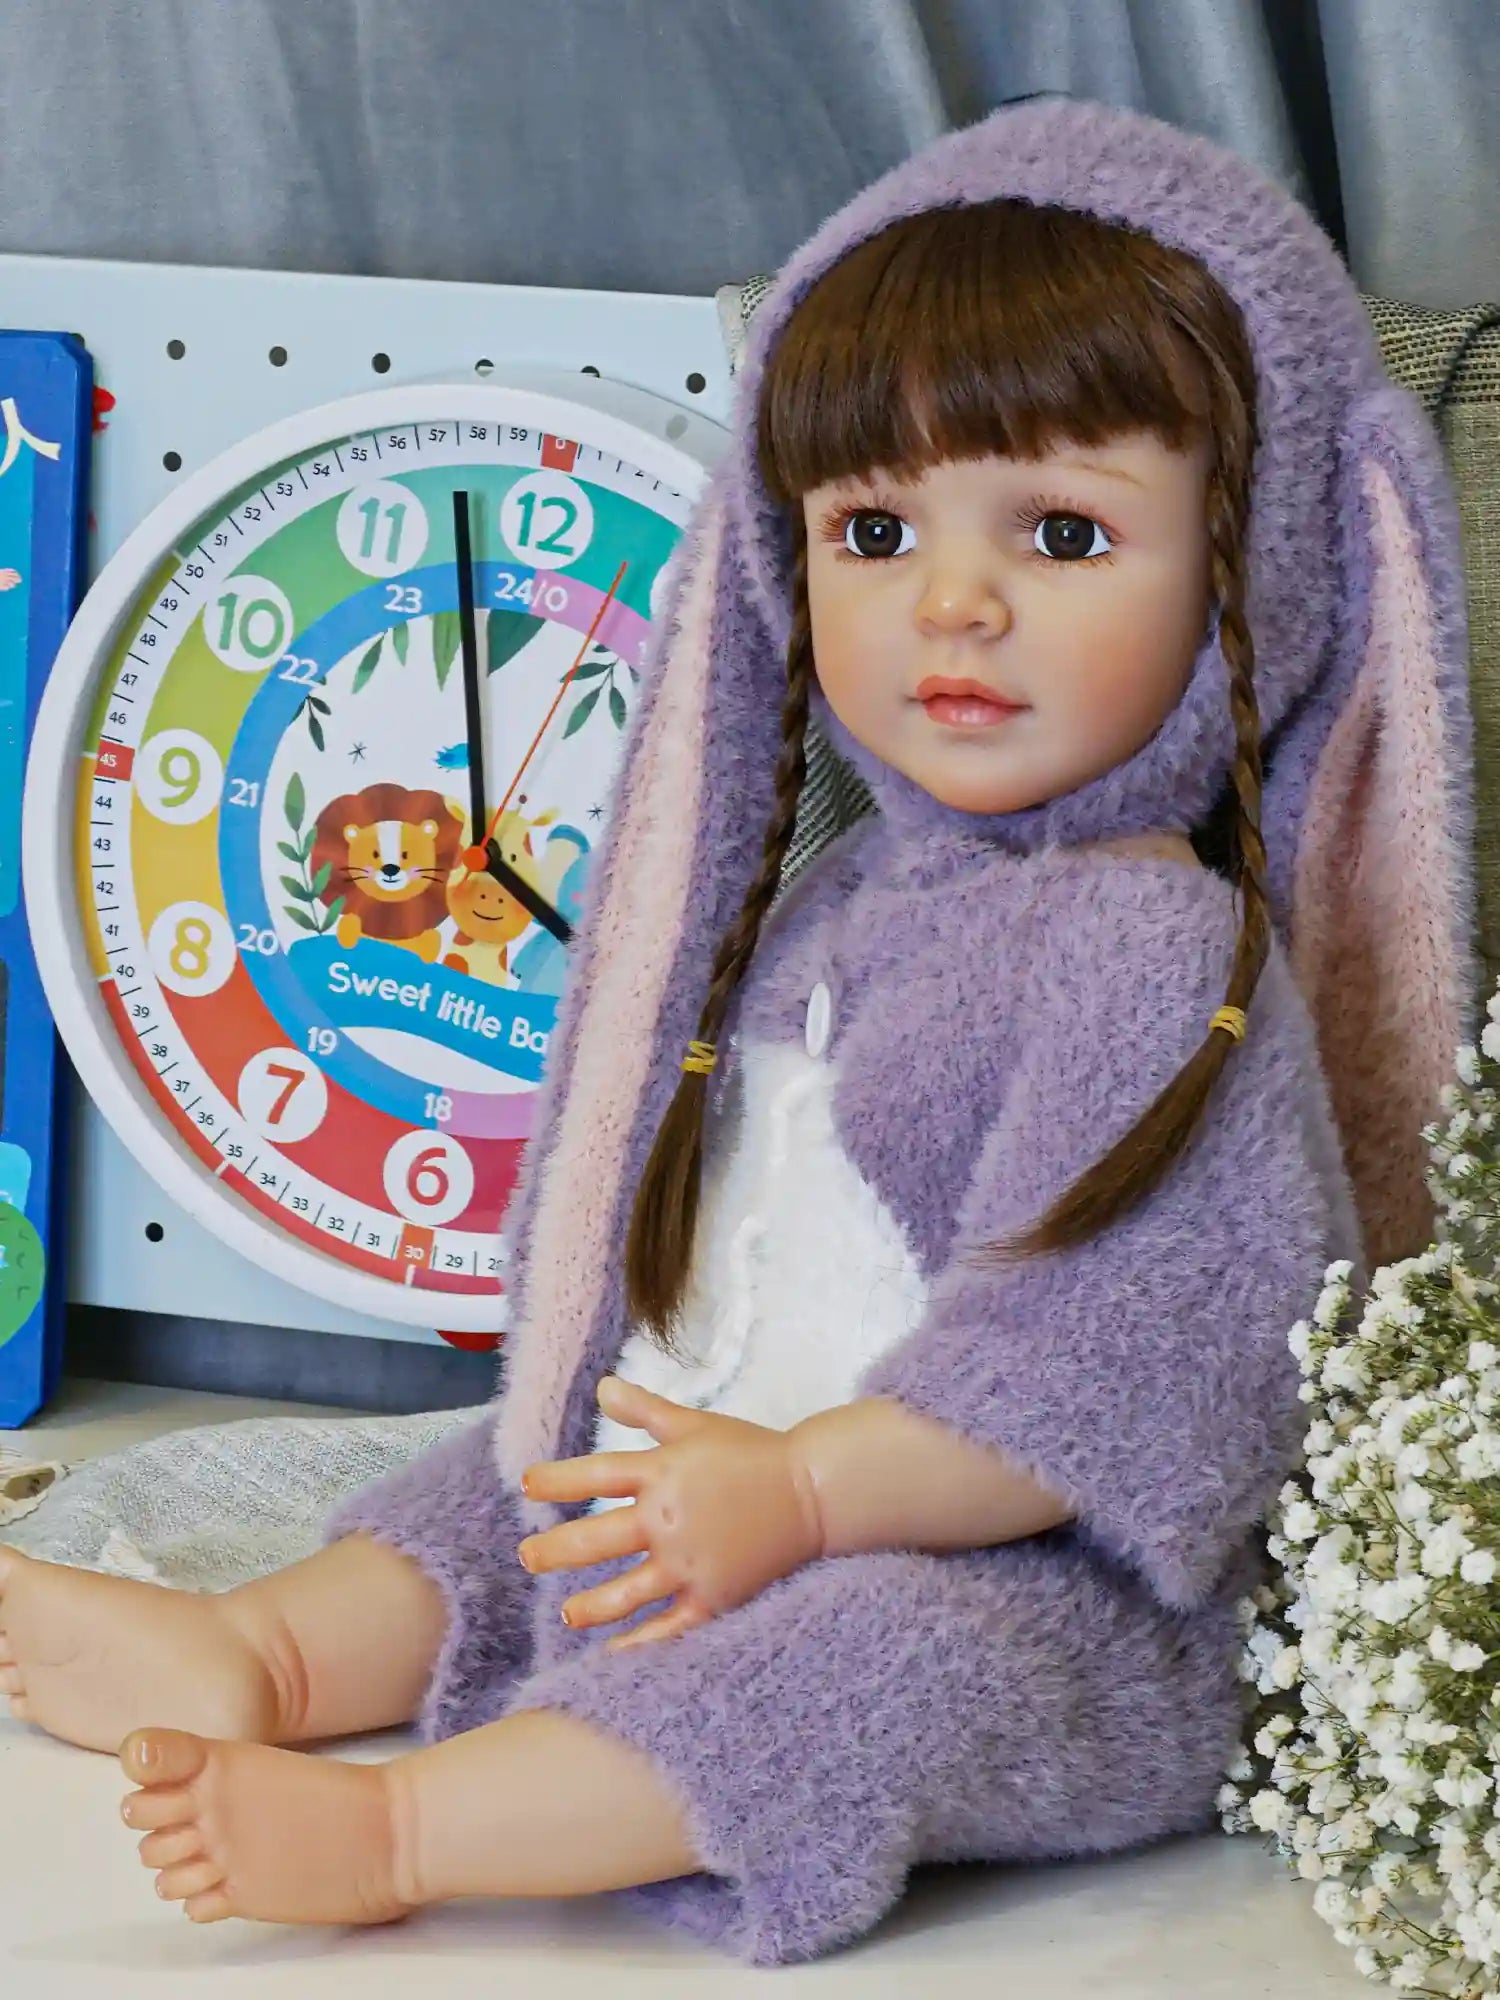 A collectible doll with chestnut brown hair in braids and thoughtful brown eyes, wearing a fluffy lilac bunny costume with long ears, seated against a grey cushion.